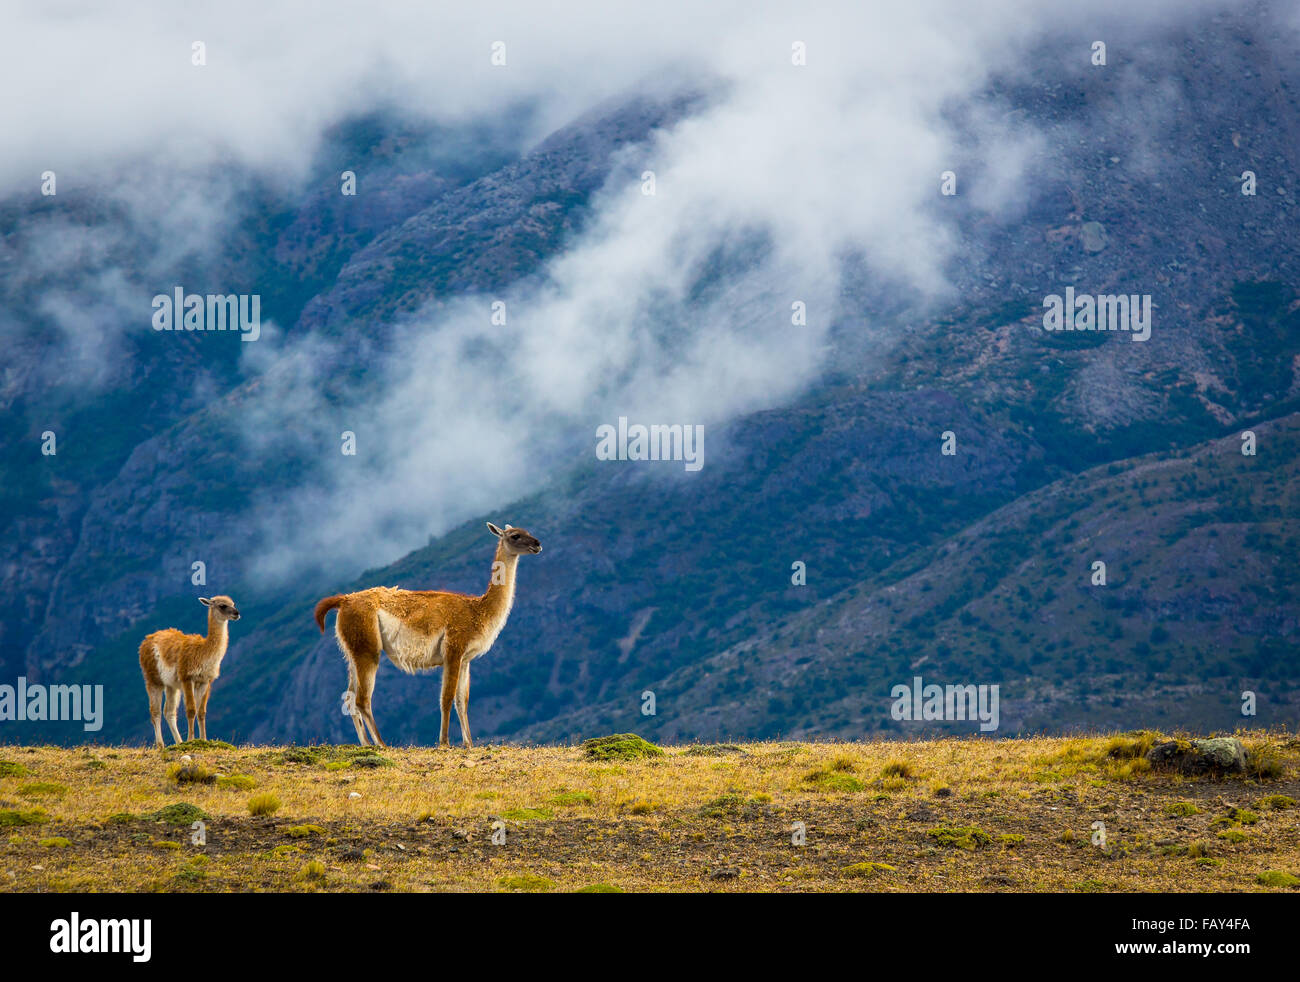 The guanaco (Lama guanicoe) is a camelid native to South America that stands between 1 and 1.2 metres (3 ft 3 in and 3 ft 11 in) Stock Photo